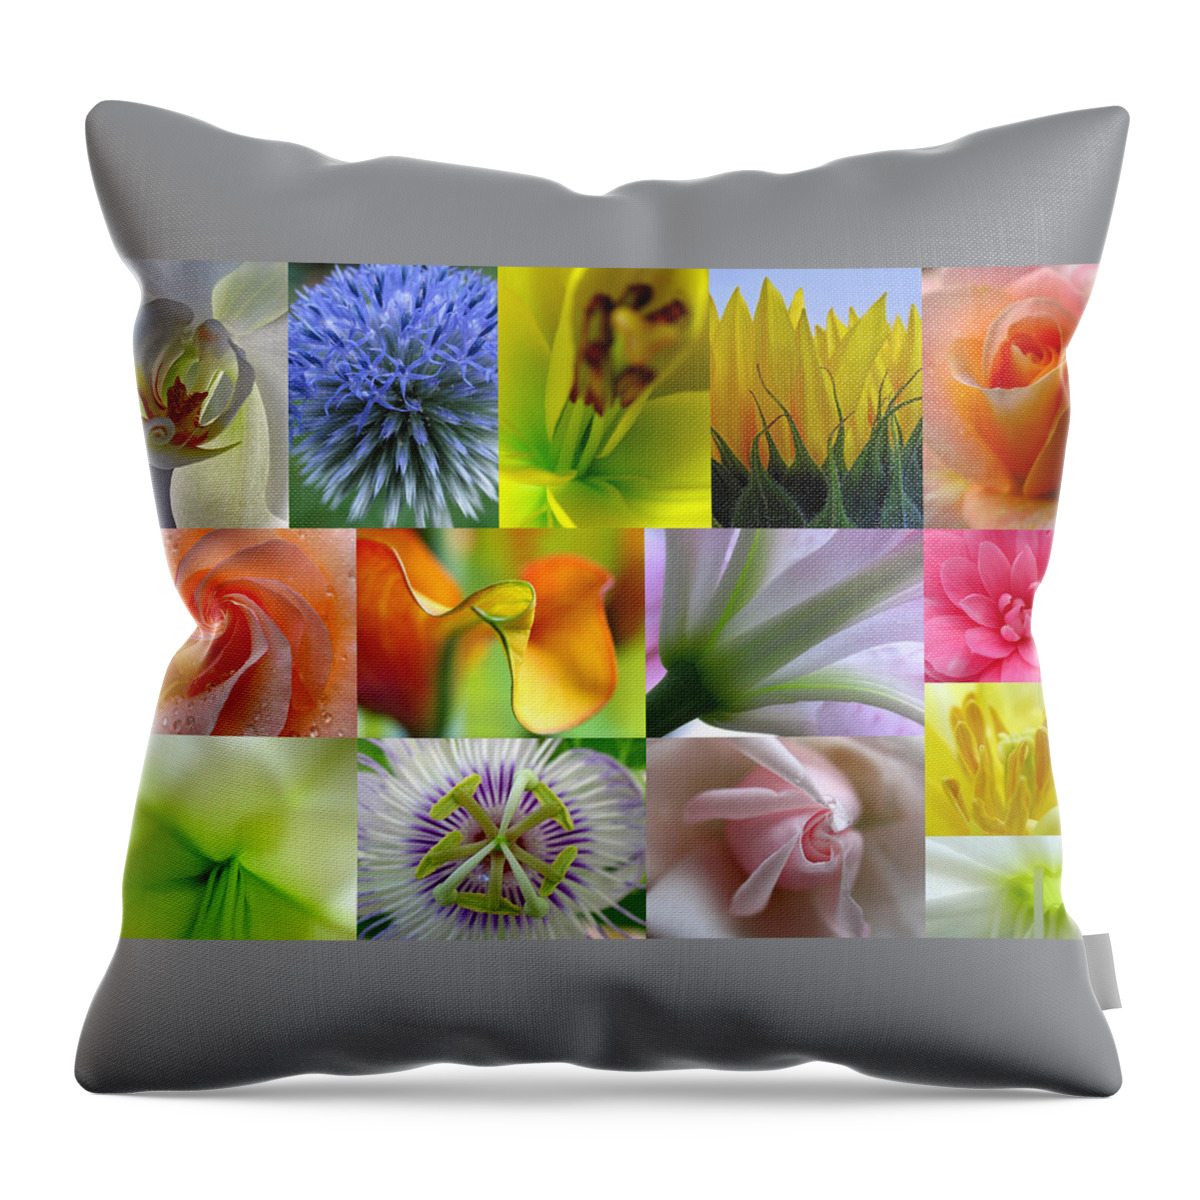 Artwork Throw Pillow featuring the photograph Flower Macro Photography by Juergen Roth